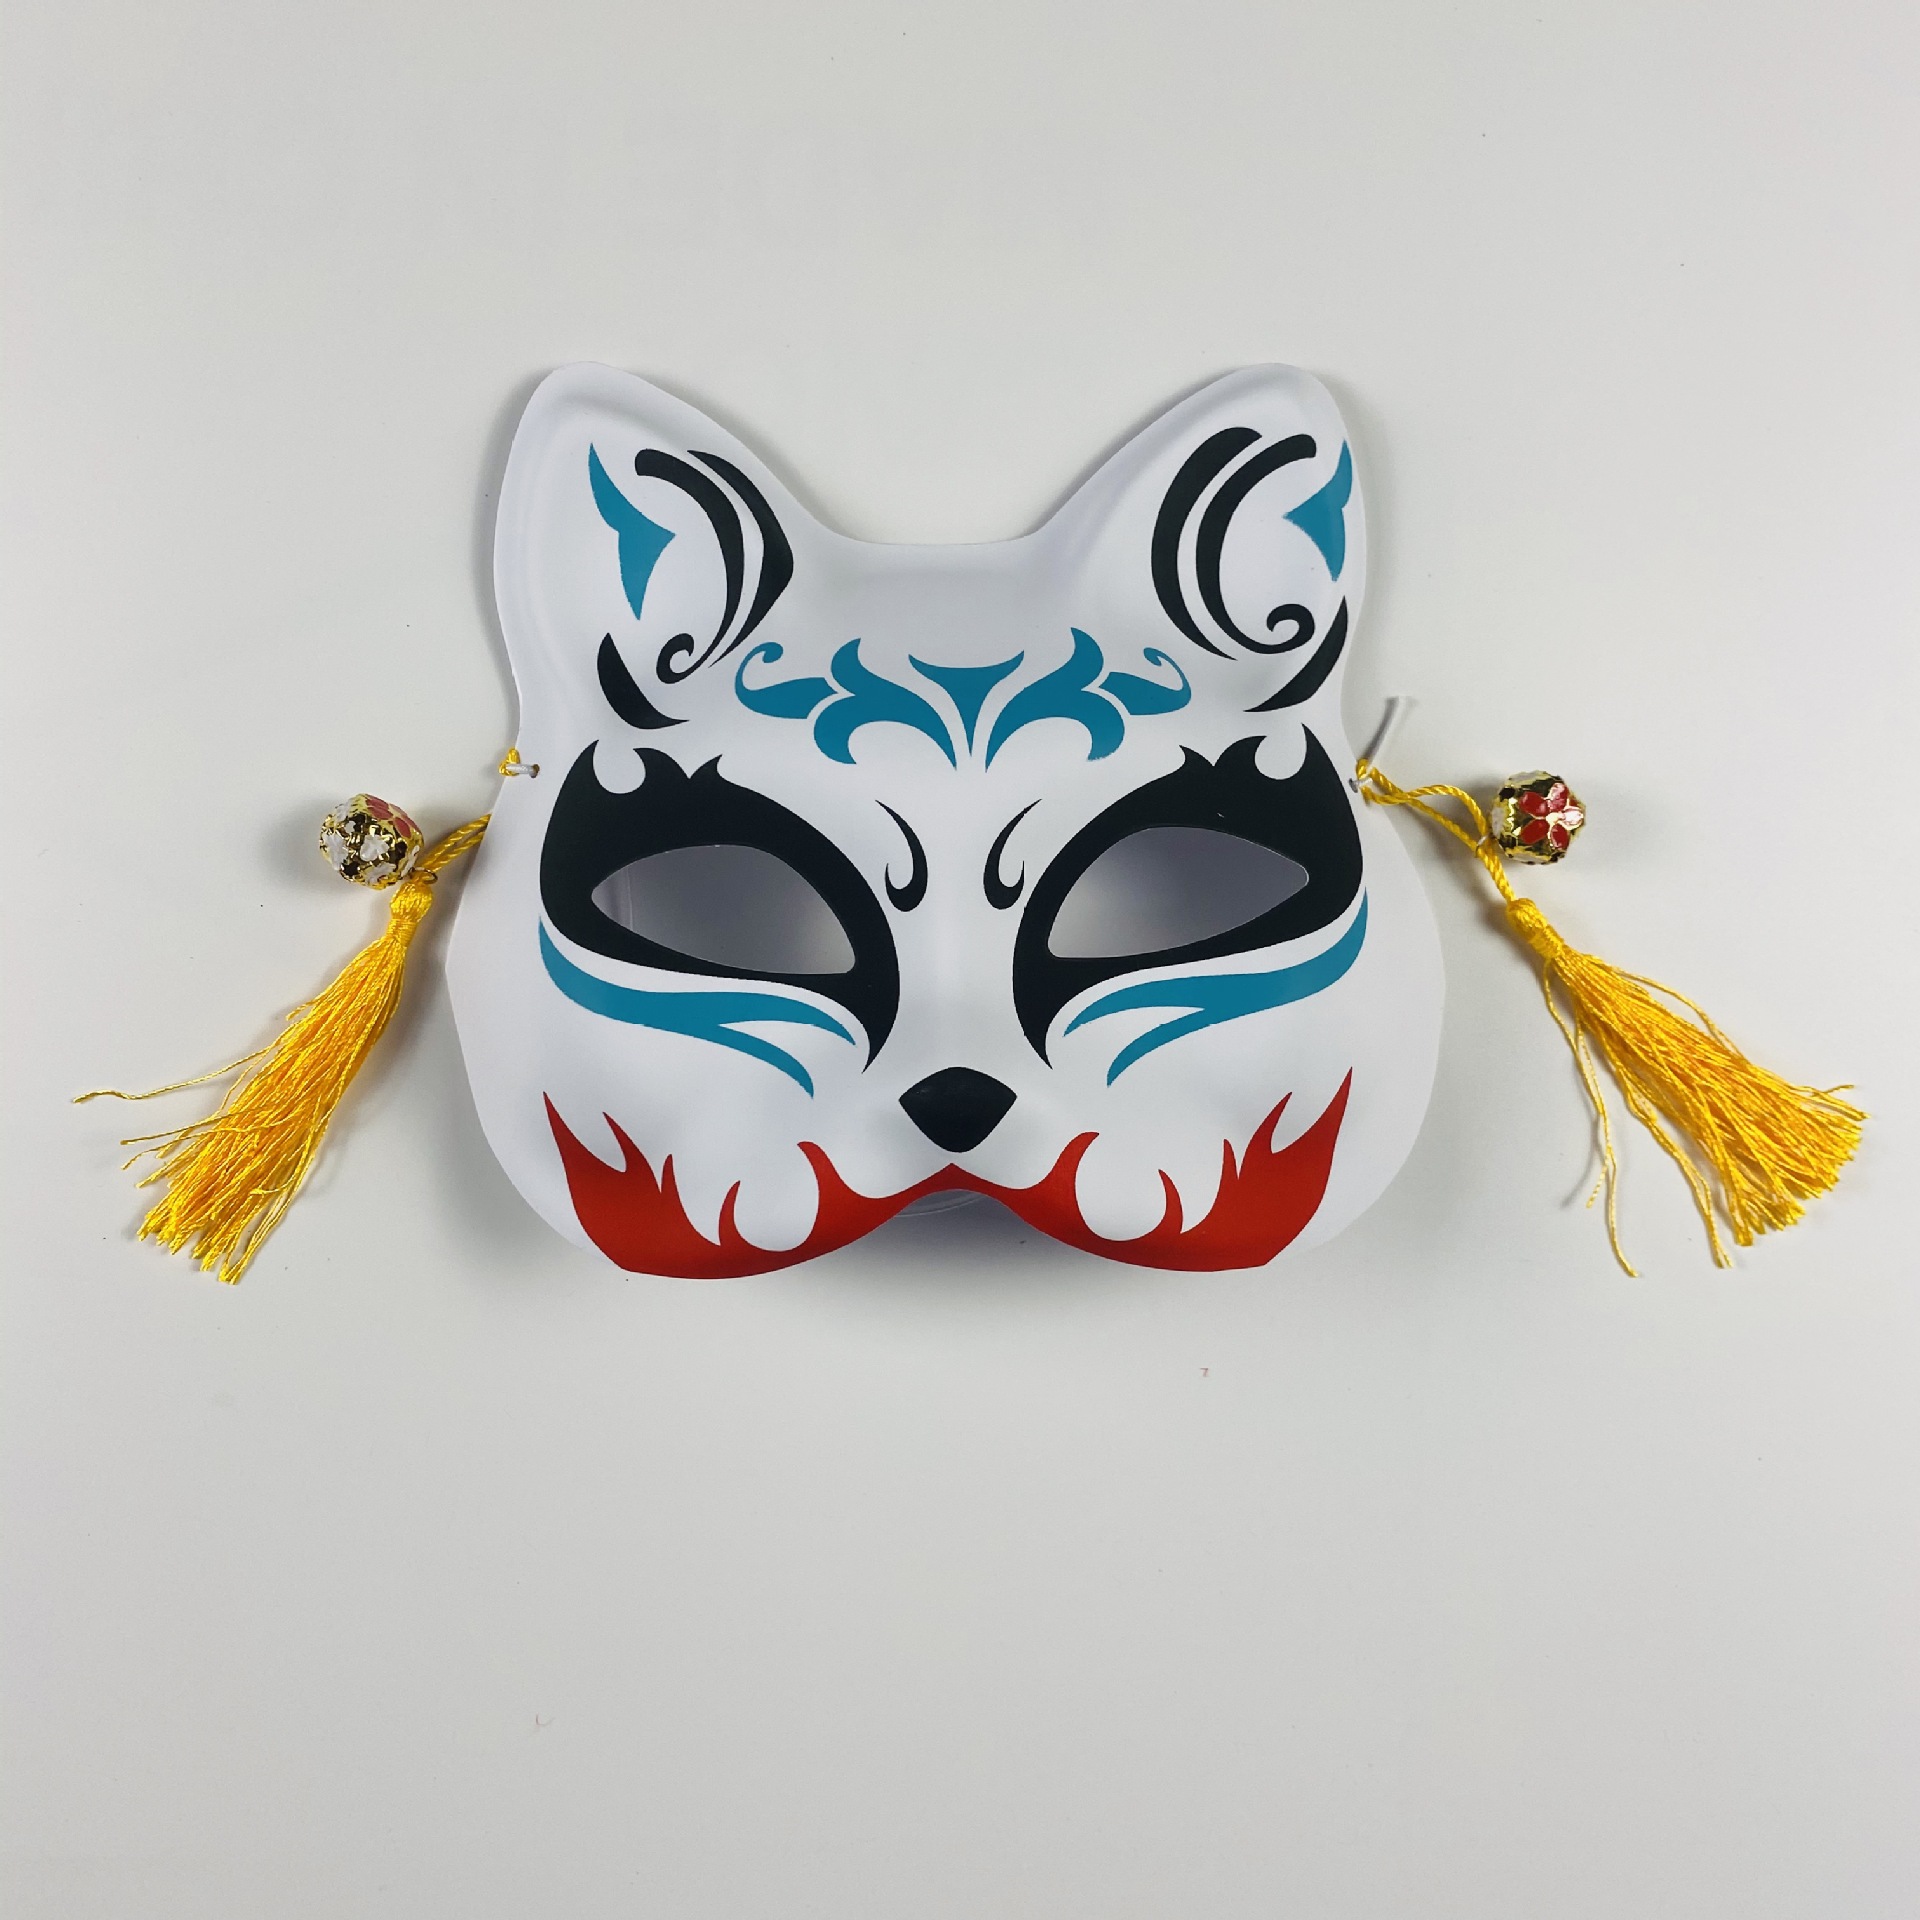 Cat Face Mask Female Fox Mask Female Half Face Antique Mask Hand Painted Anime Secondary Element Cosplay Mask